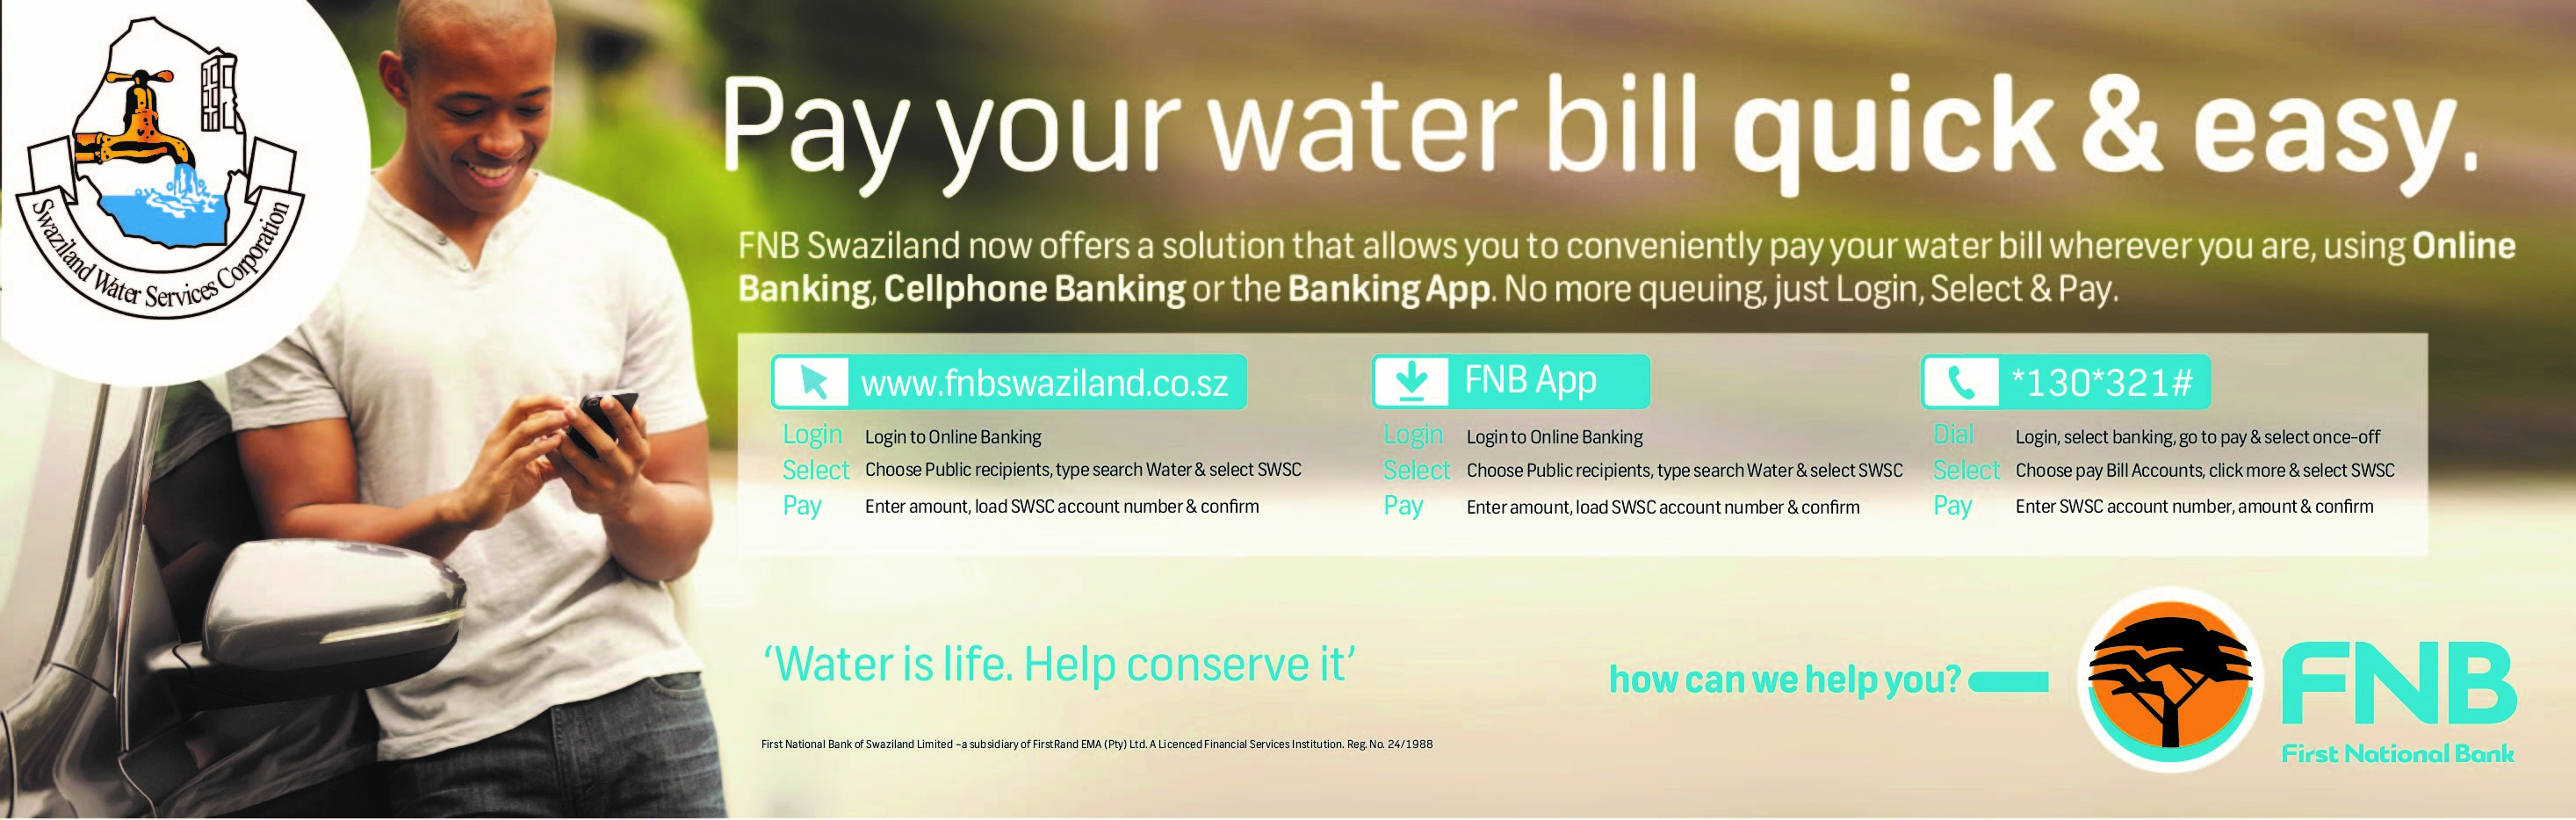 FNB water payment option